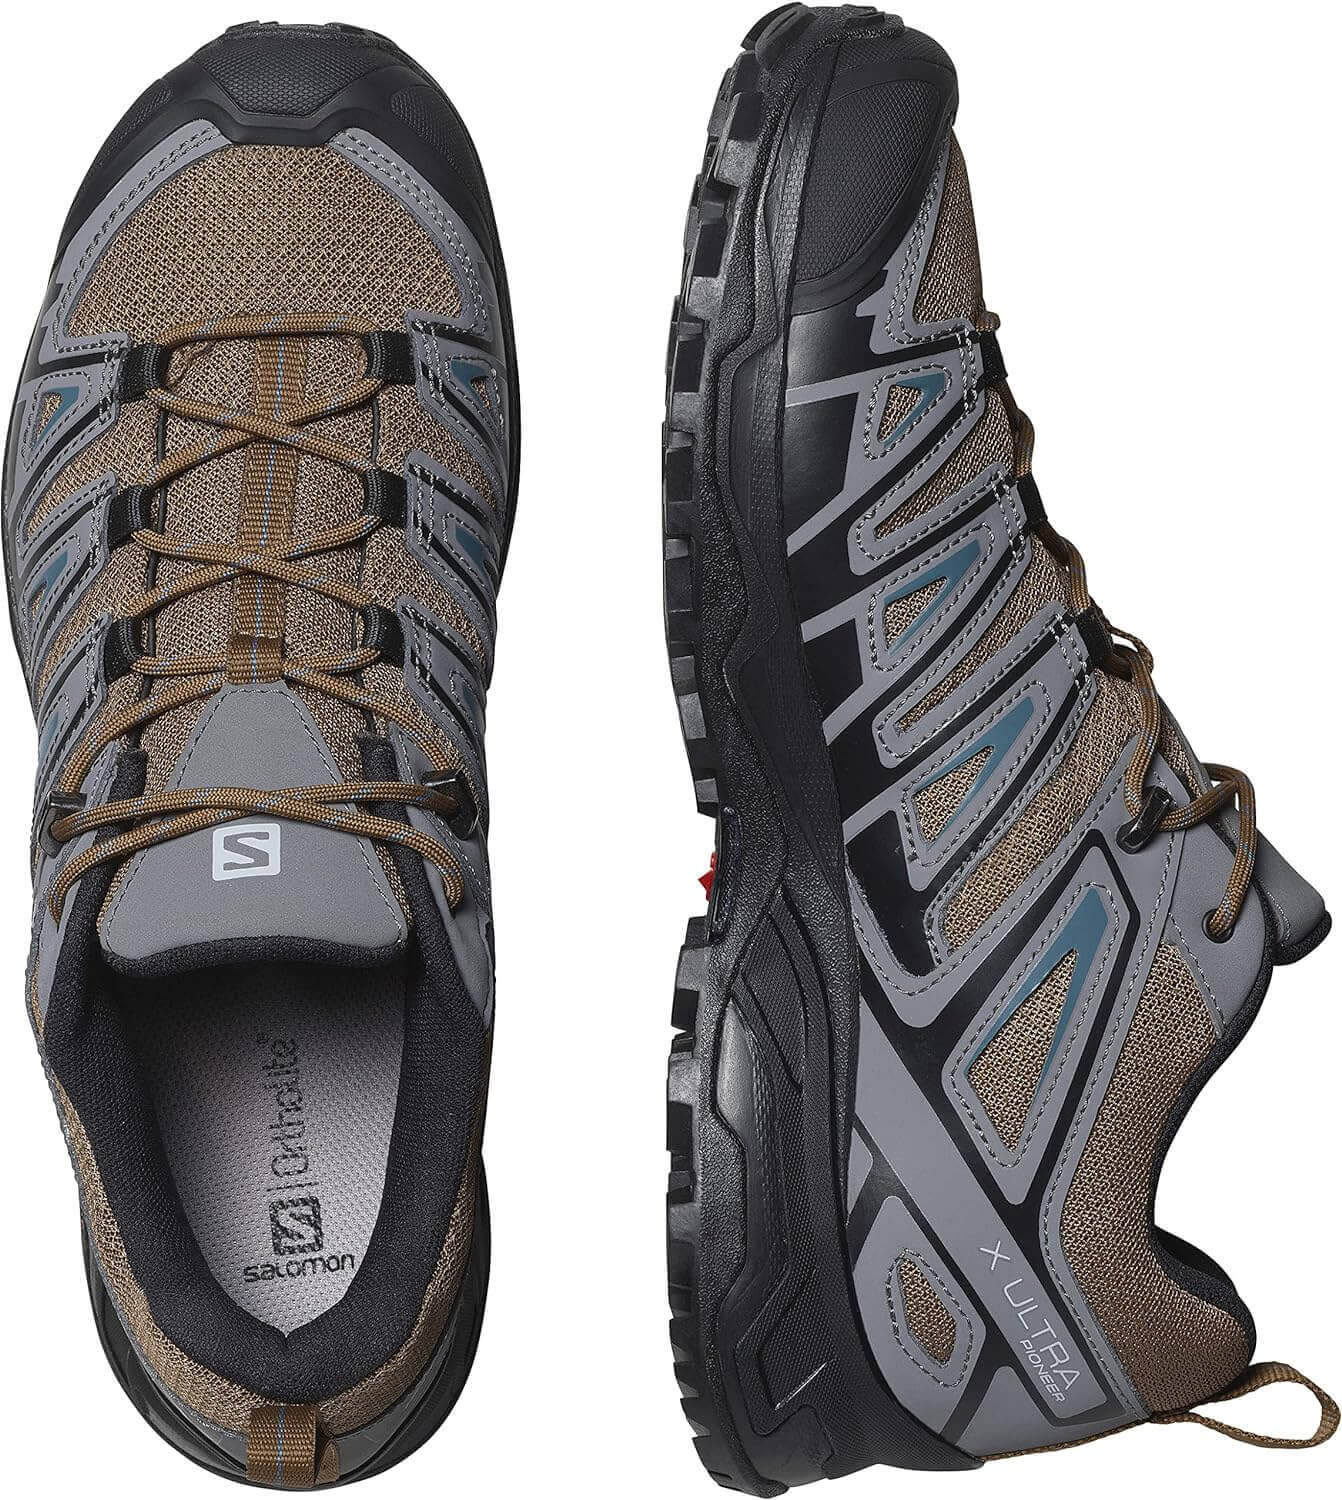 Shop The Latest >Salomon Men's X Ultra Pioneer Aero Hiking Shoes > *Only $110.43*> From The Top Brand > *Salomonl* > Shop Now and Get Free Shipping On Orders Over $45.00 >*Shop Earth Foot*